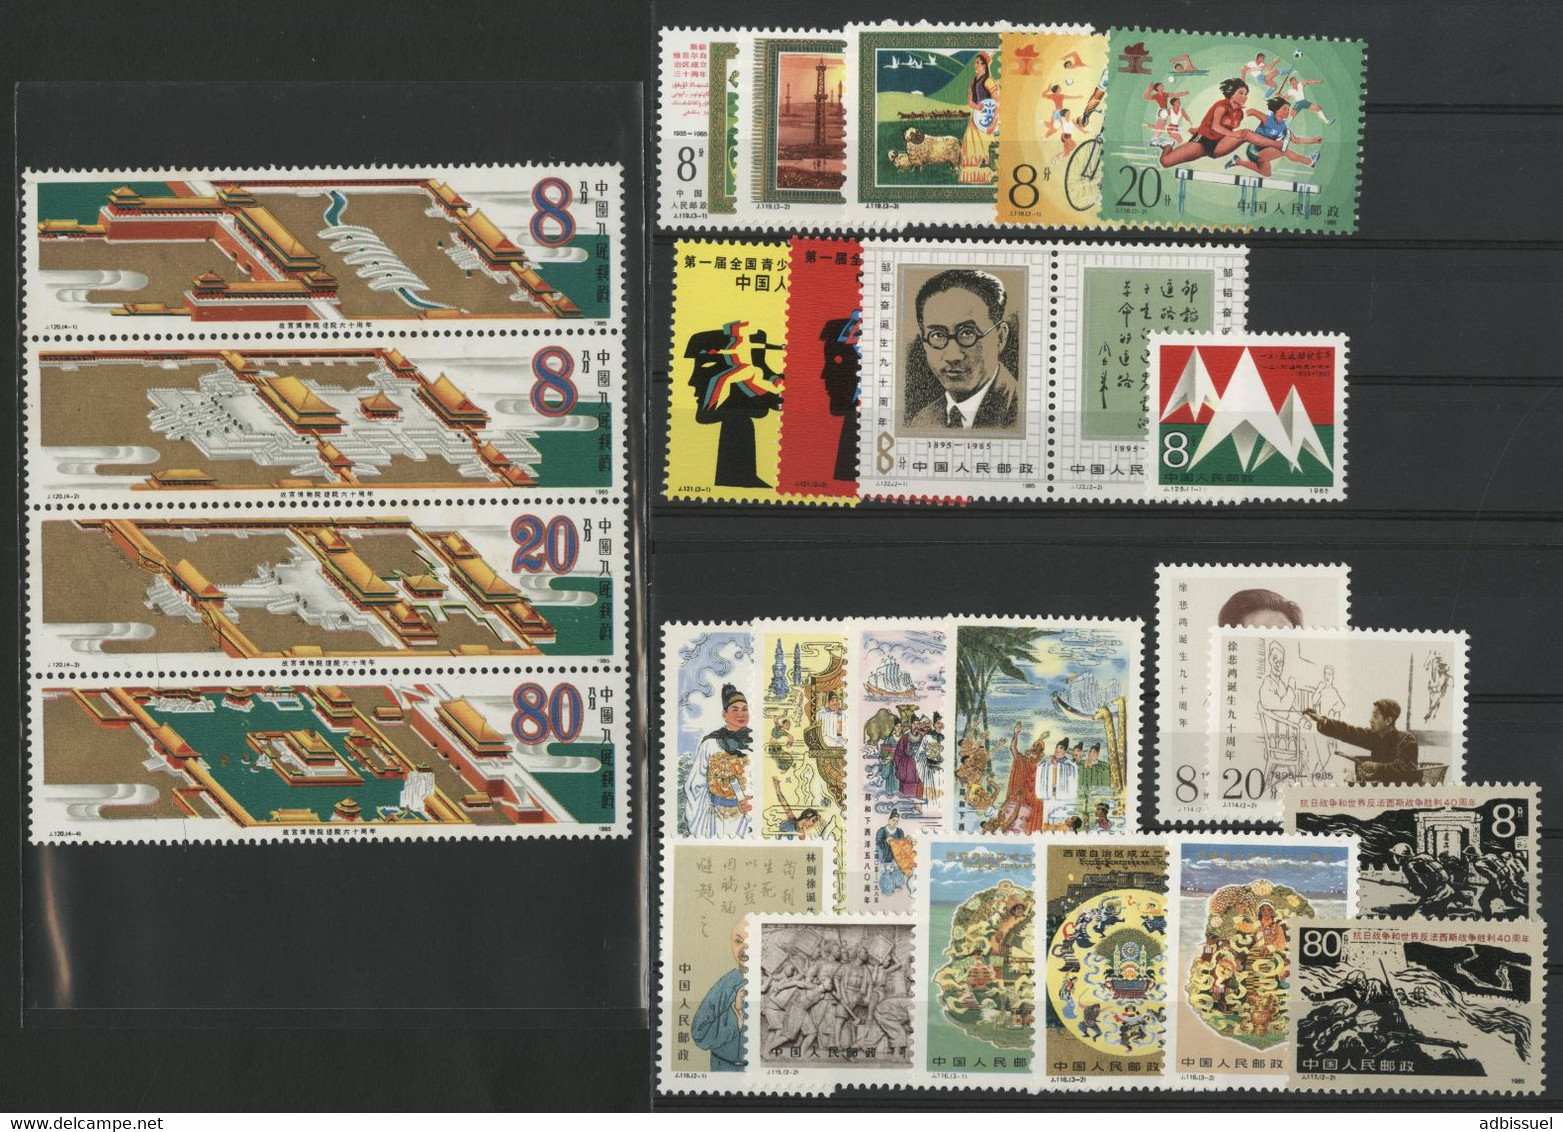 CHINA / CHINE 1985 Value 21 €. 28 Commemoratives Stamps MNH ** N° 2732 To 2758. VG/TB. - Nuovi